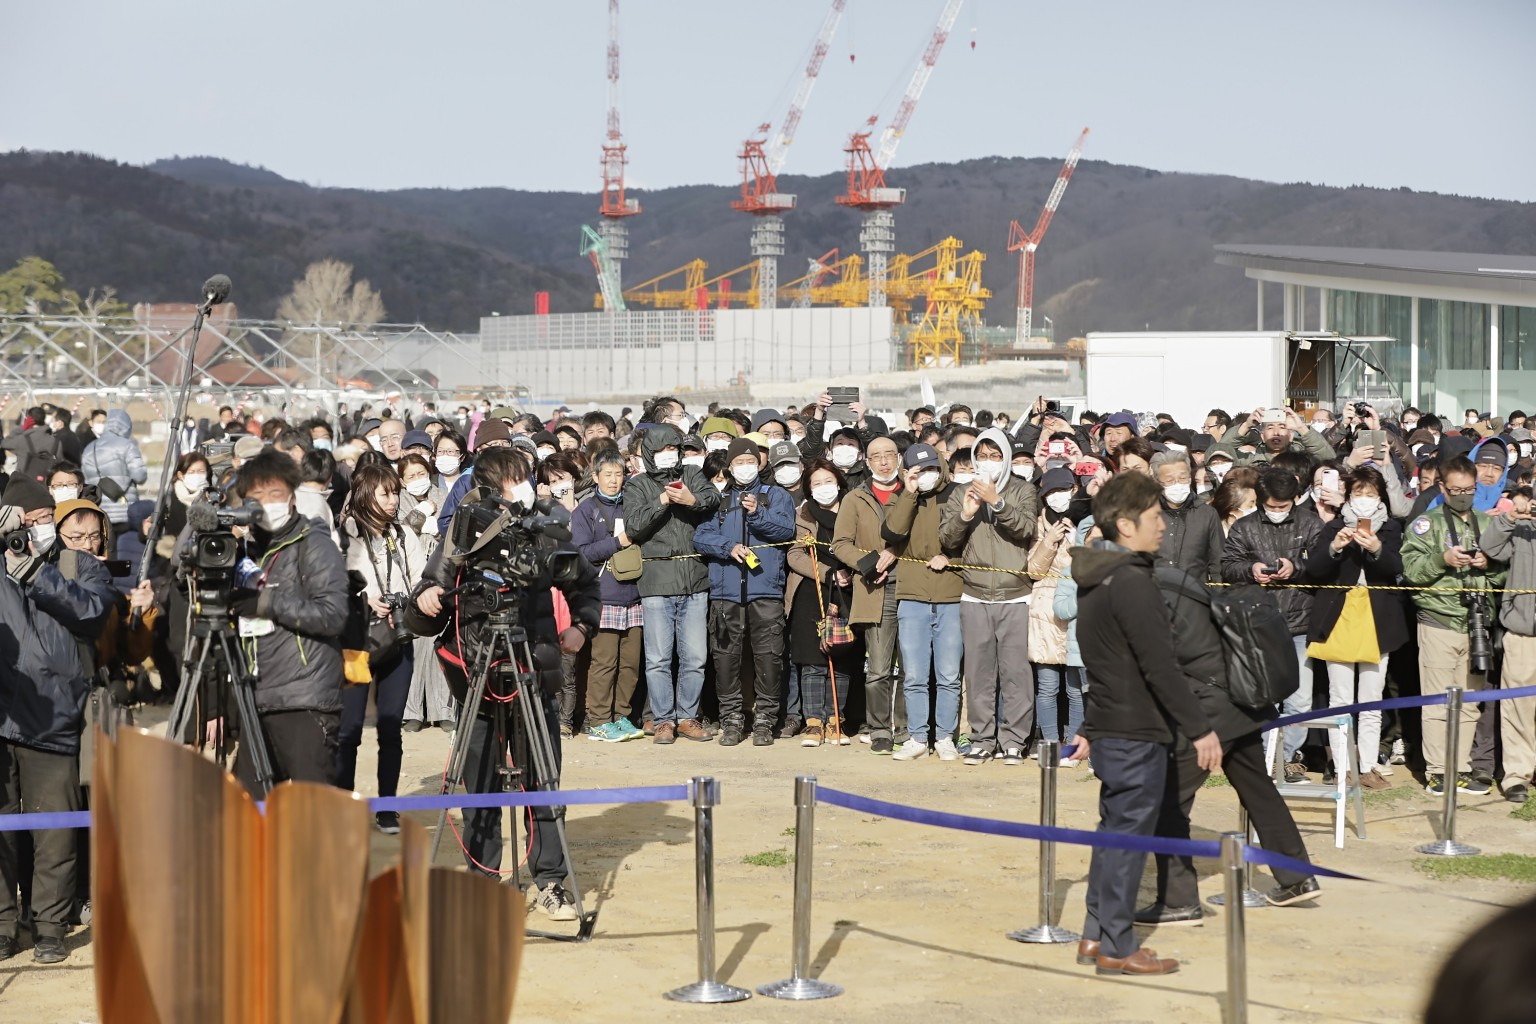 Large crowds have previously gathered to see the Olympic Flame in Japan, despite warnings not to do so because of the coronavirus pandemic ©Tokyo 2020